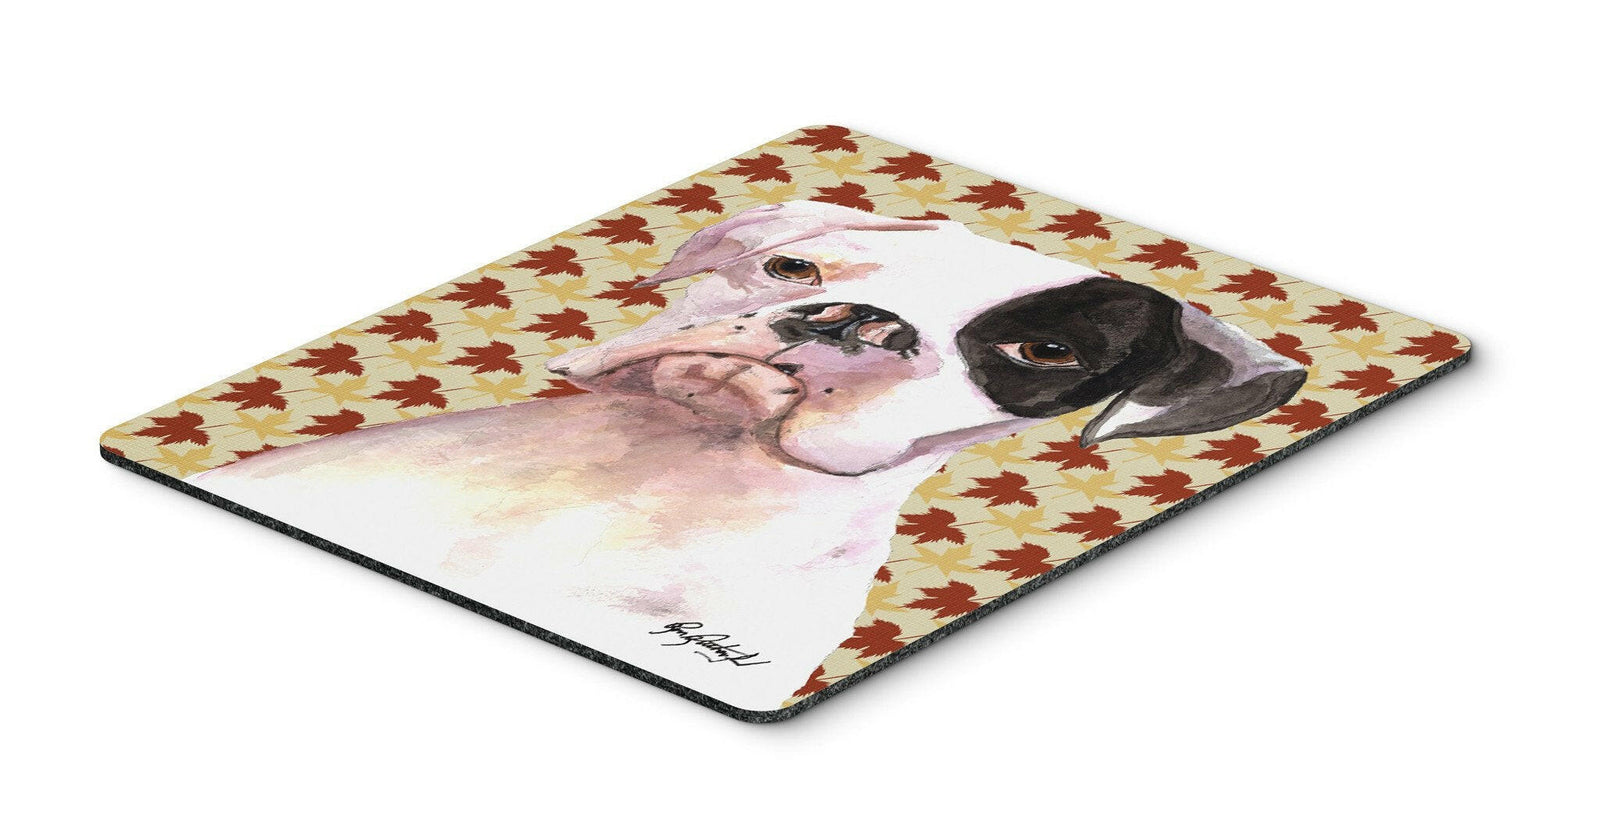 Cooper Fall Leaves Boxer Mouse Pad, Hot Pad or Trivet by Caroline's Treasures